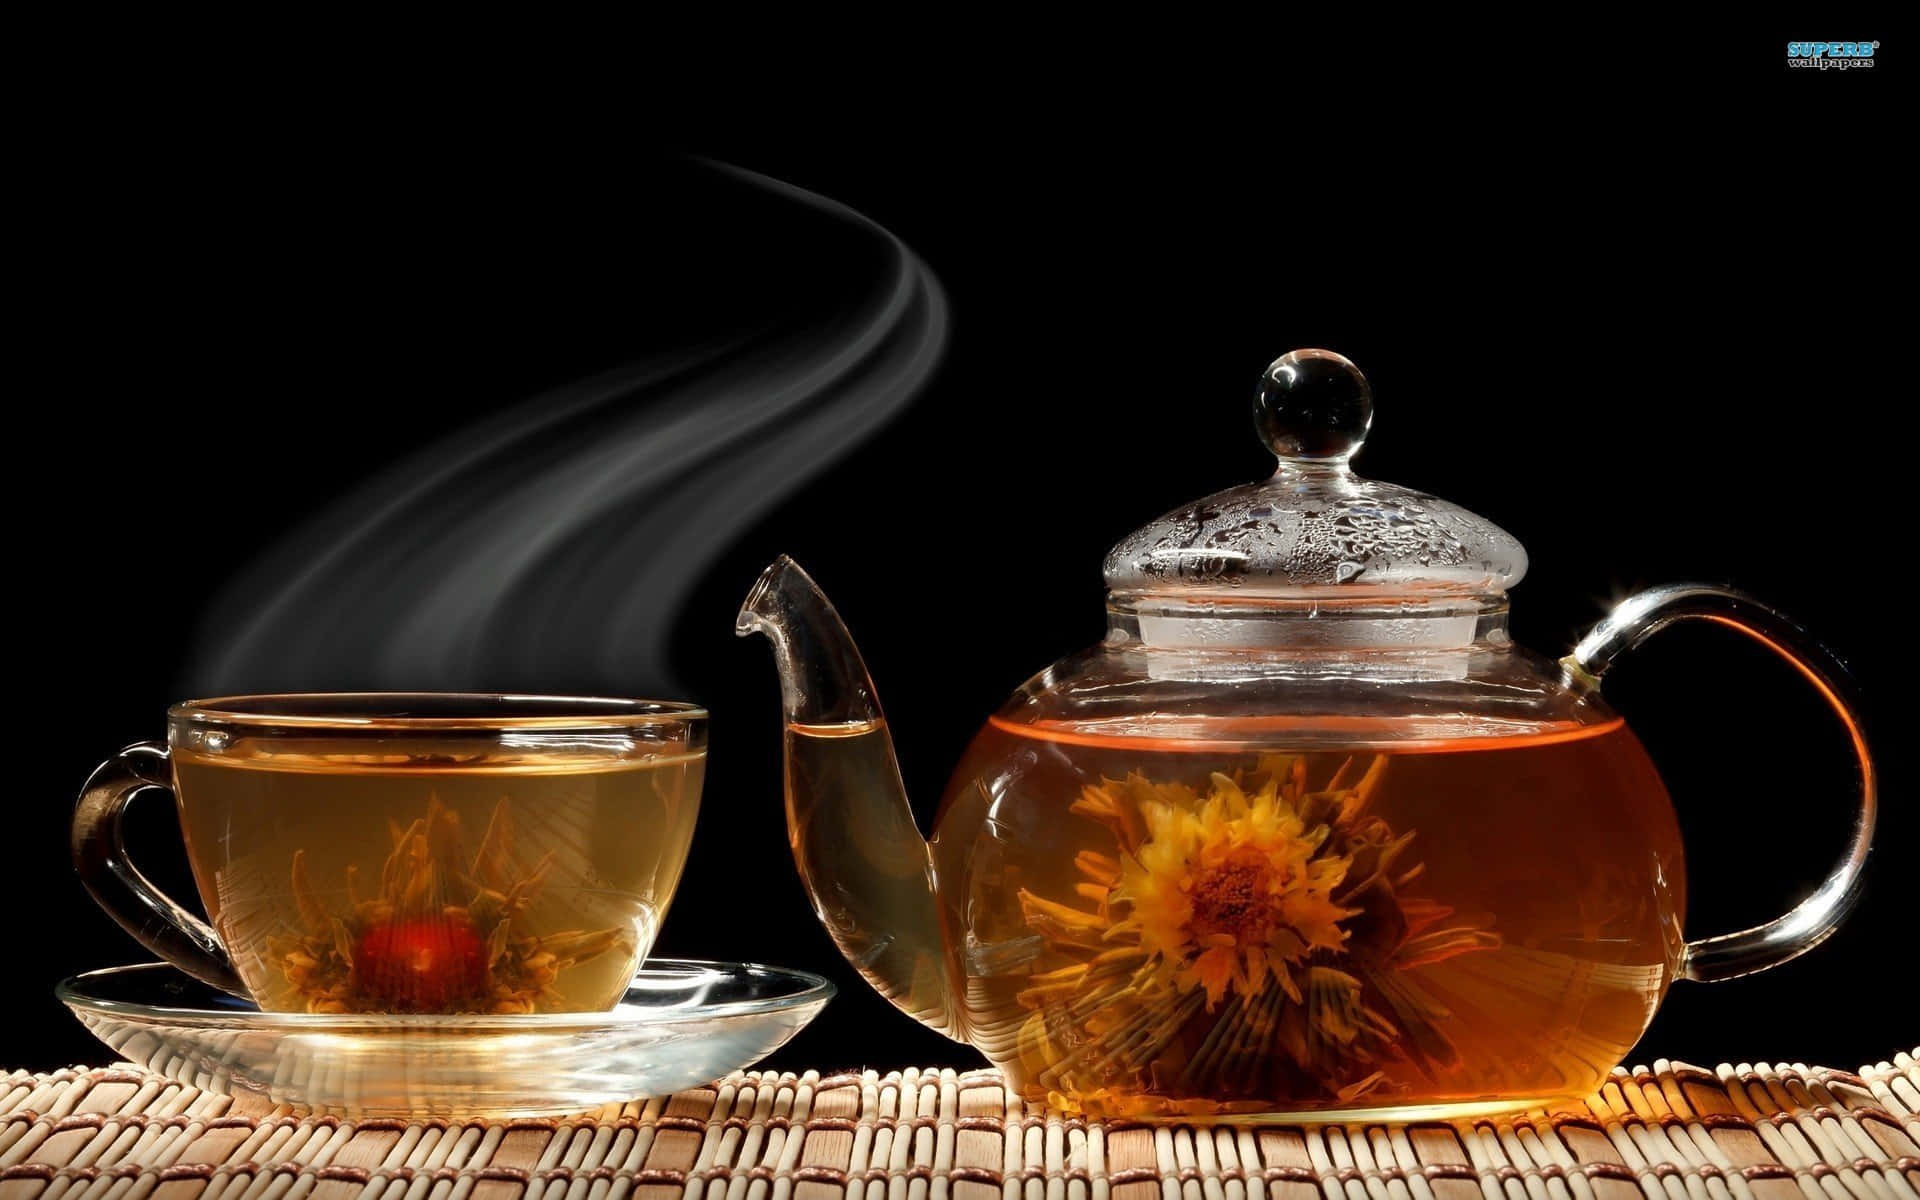 Enjoy a cup of warmth and relaxation with a cup of tea.